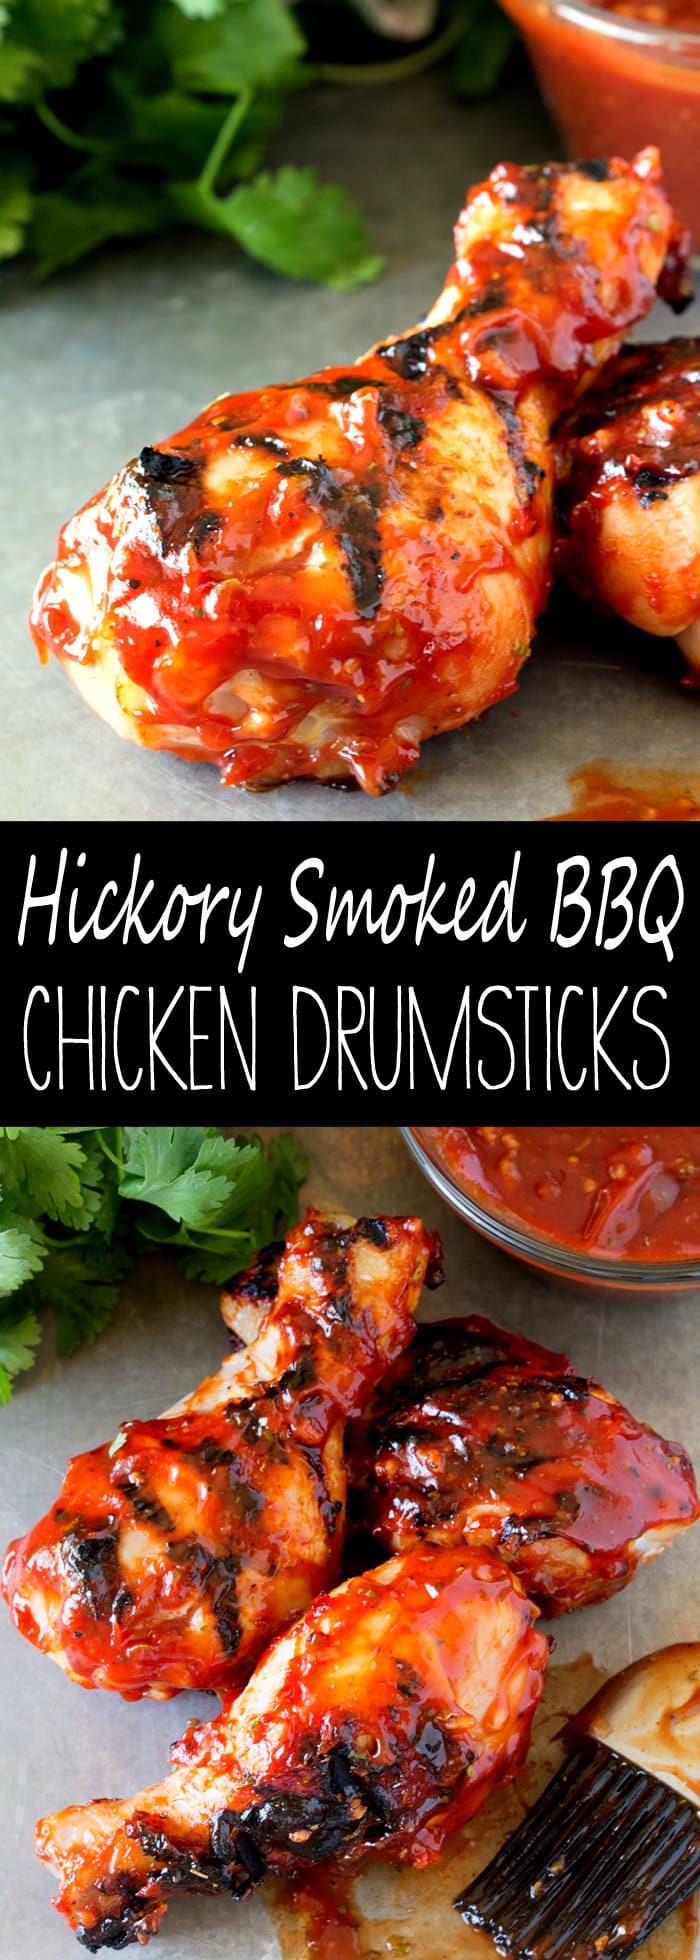  A homemade hickory smoked BBQ sauce is brushed over chicken drumsticks and grilled to per Hickory Smoked BBQ Chicken Drumsticks